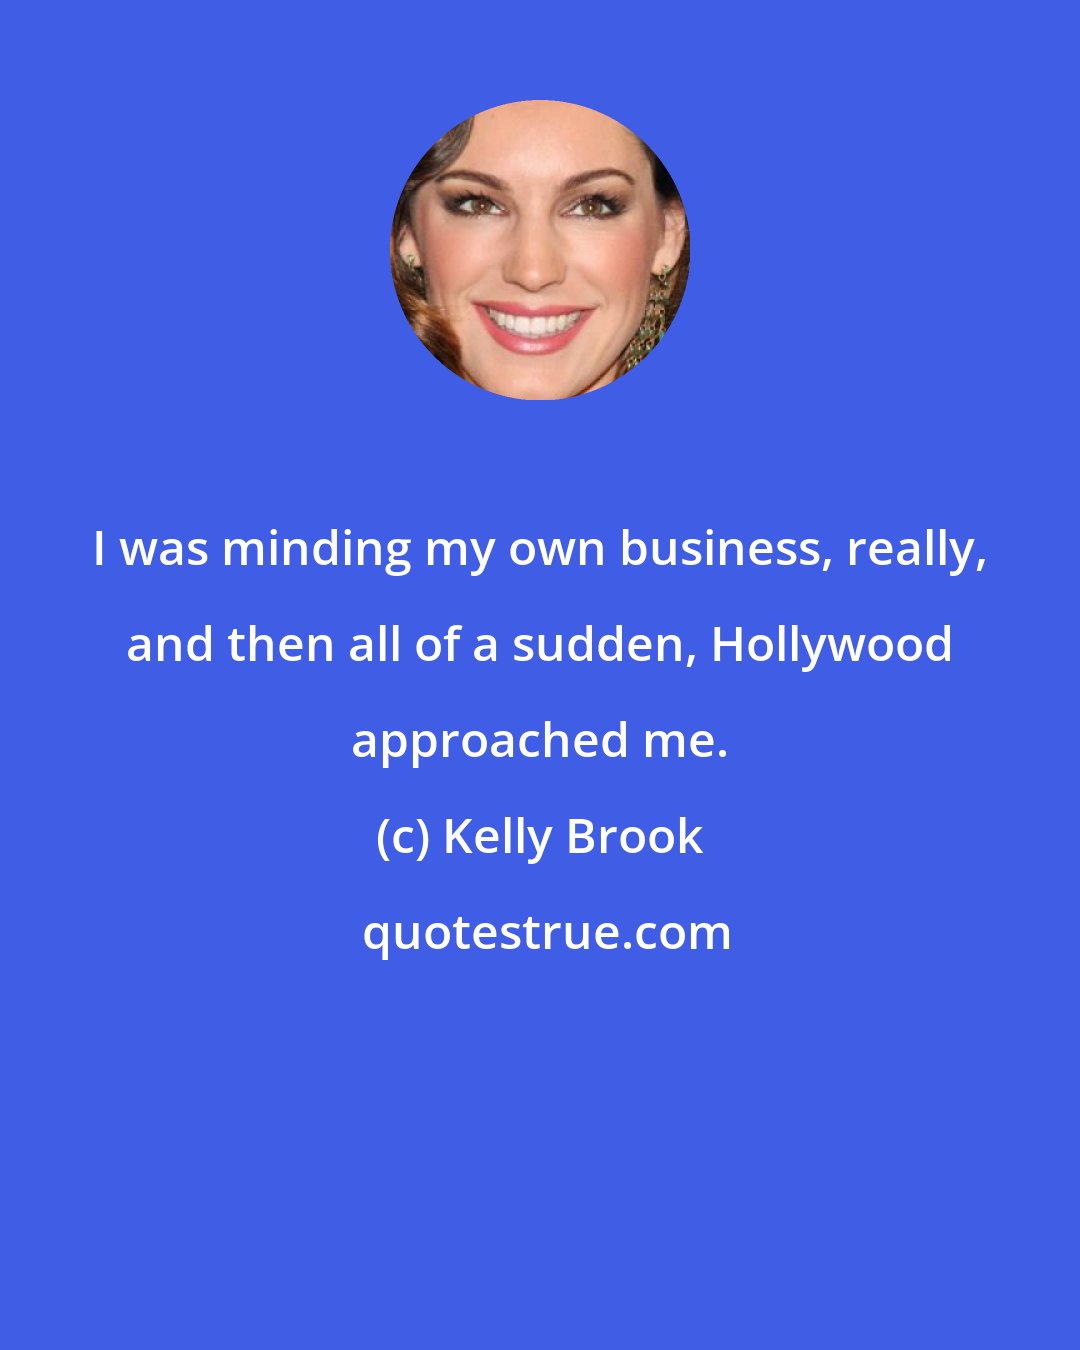 Kelly Brook: I was minding my own business, really, and then all of a sudden, Hollywood approached me.